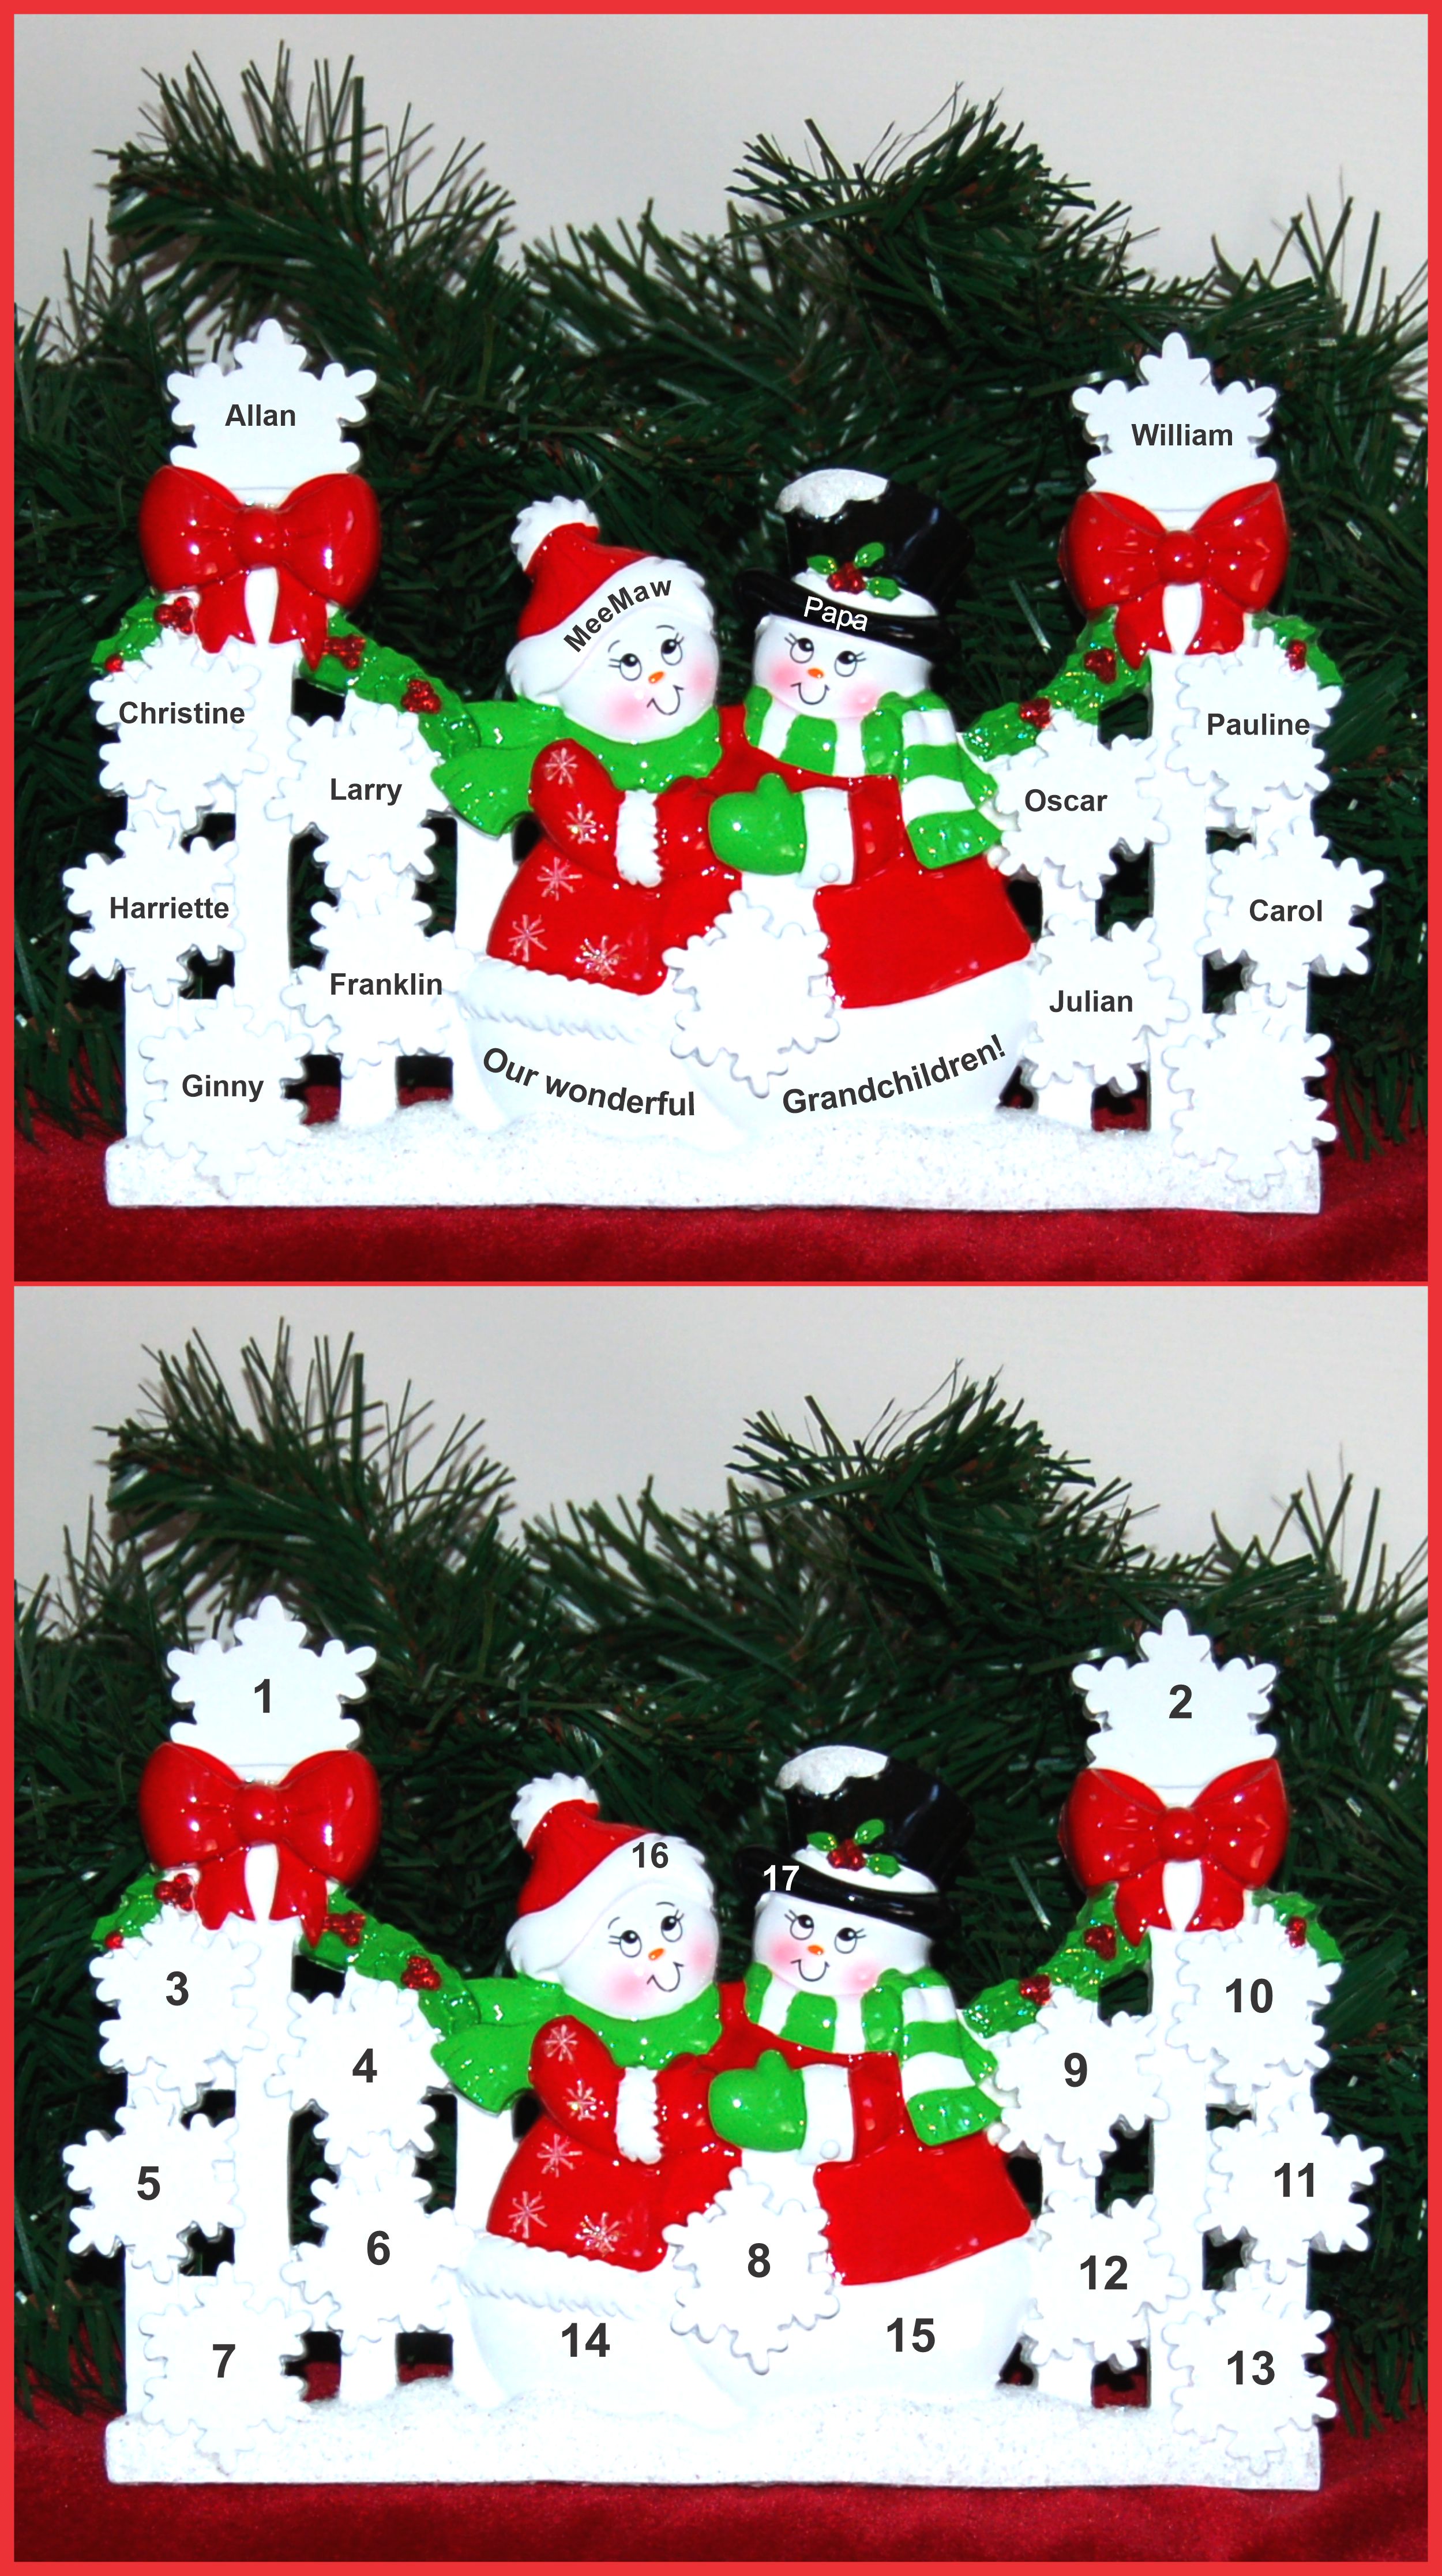 Grandparents Tabletop Christmas Decoration Snowflakes for 11 Grandchildren Personalized by RussellRhodes.com